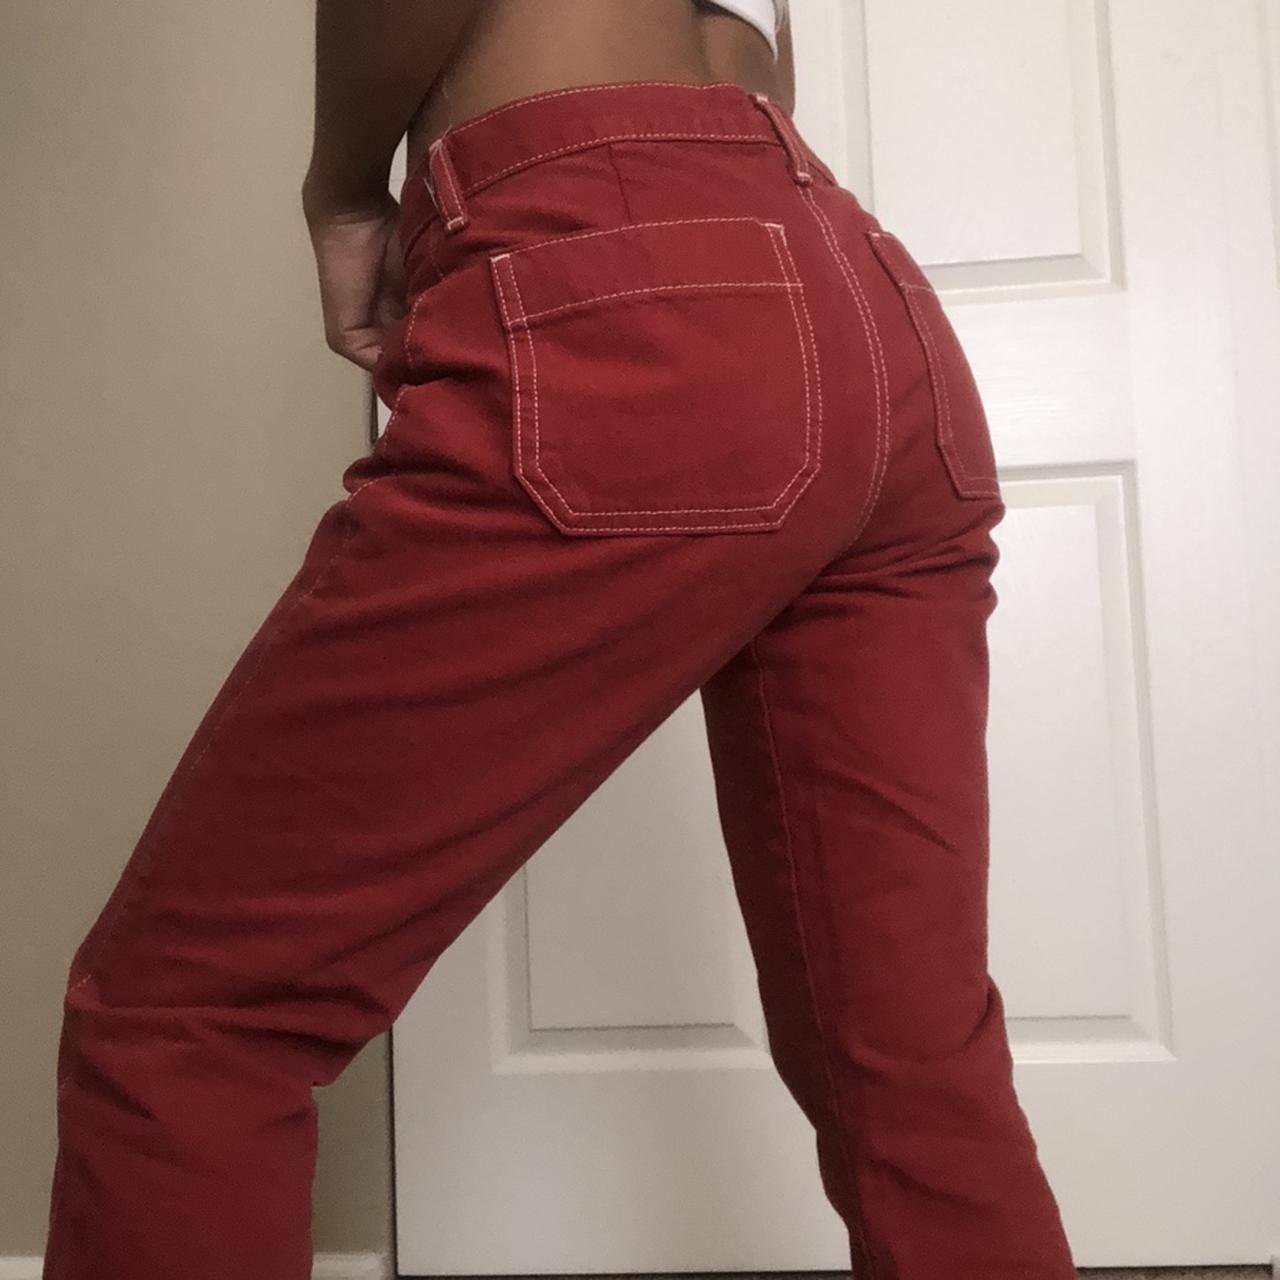 Such a good find! A pair of low waisted red flare